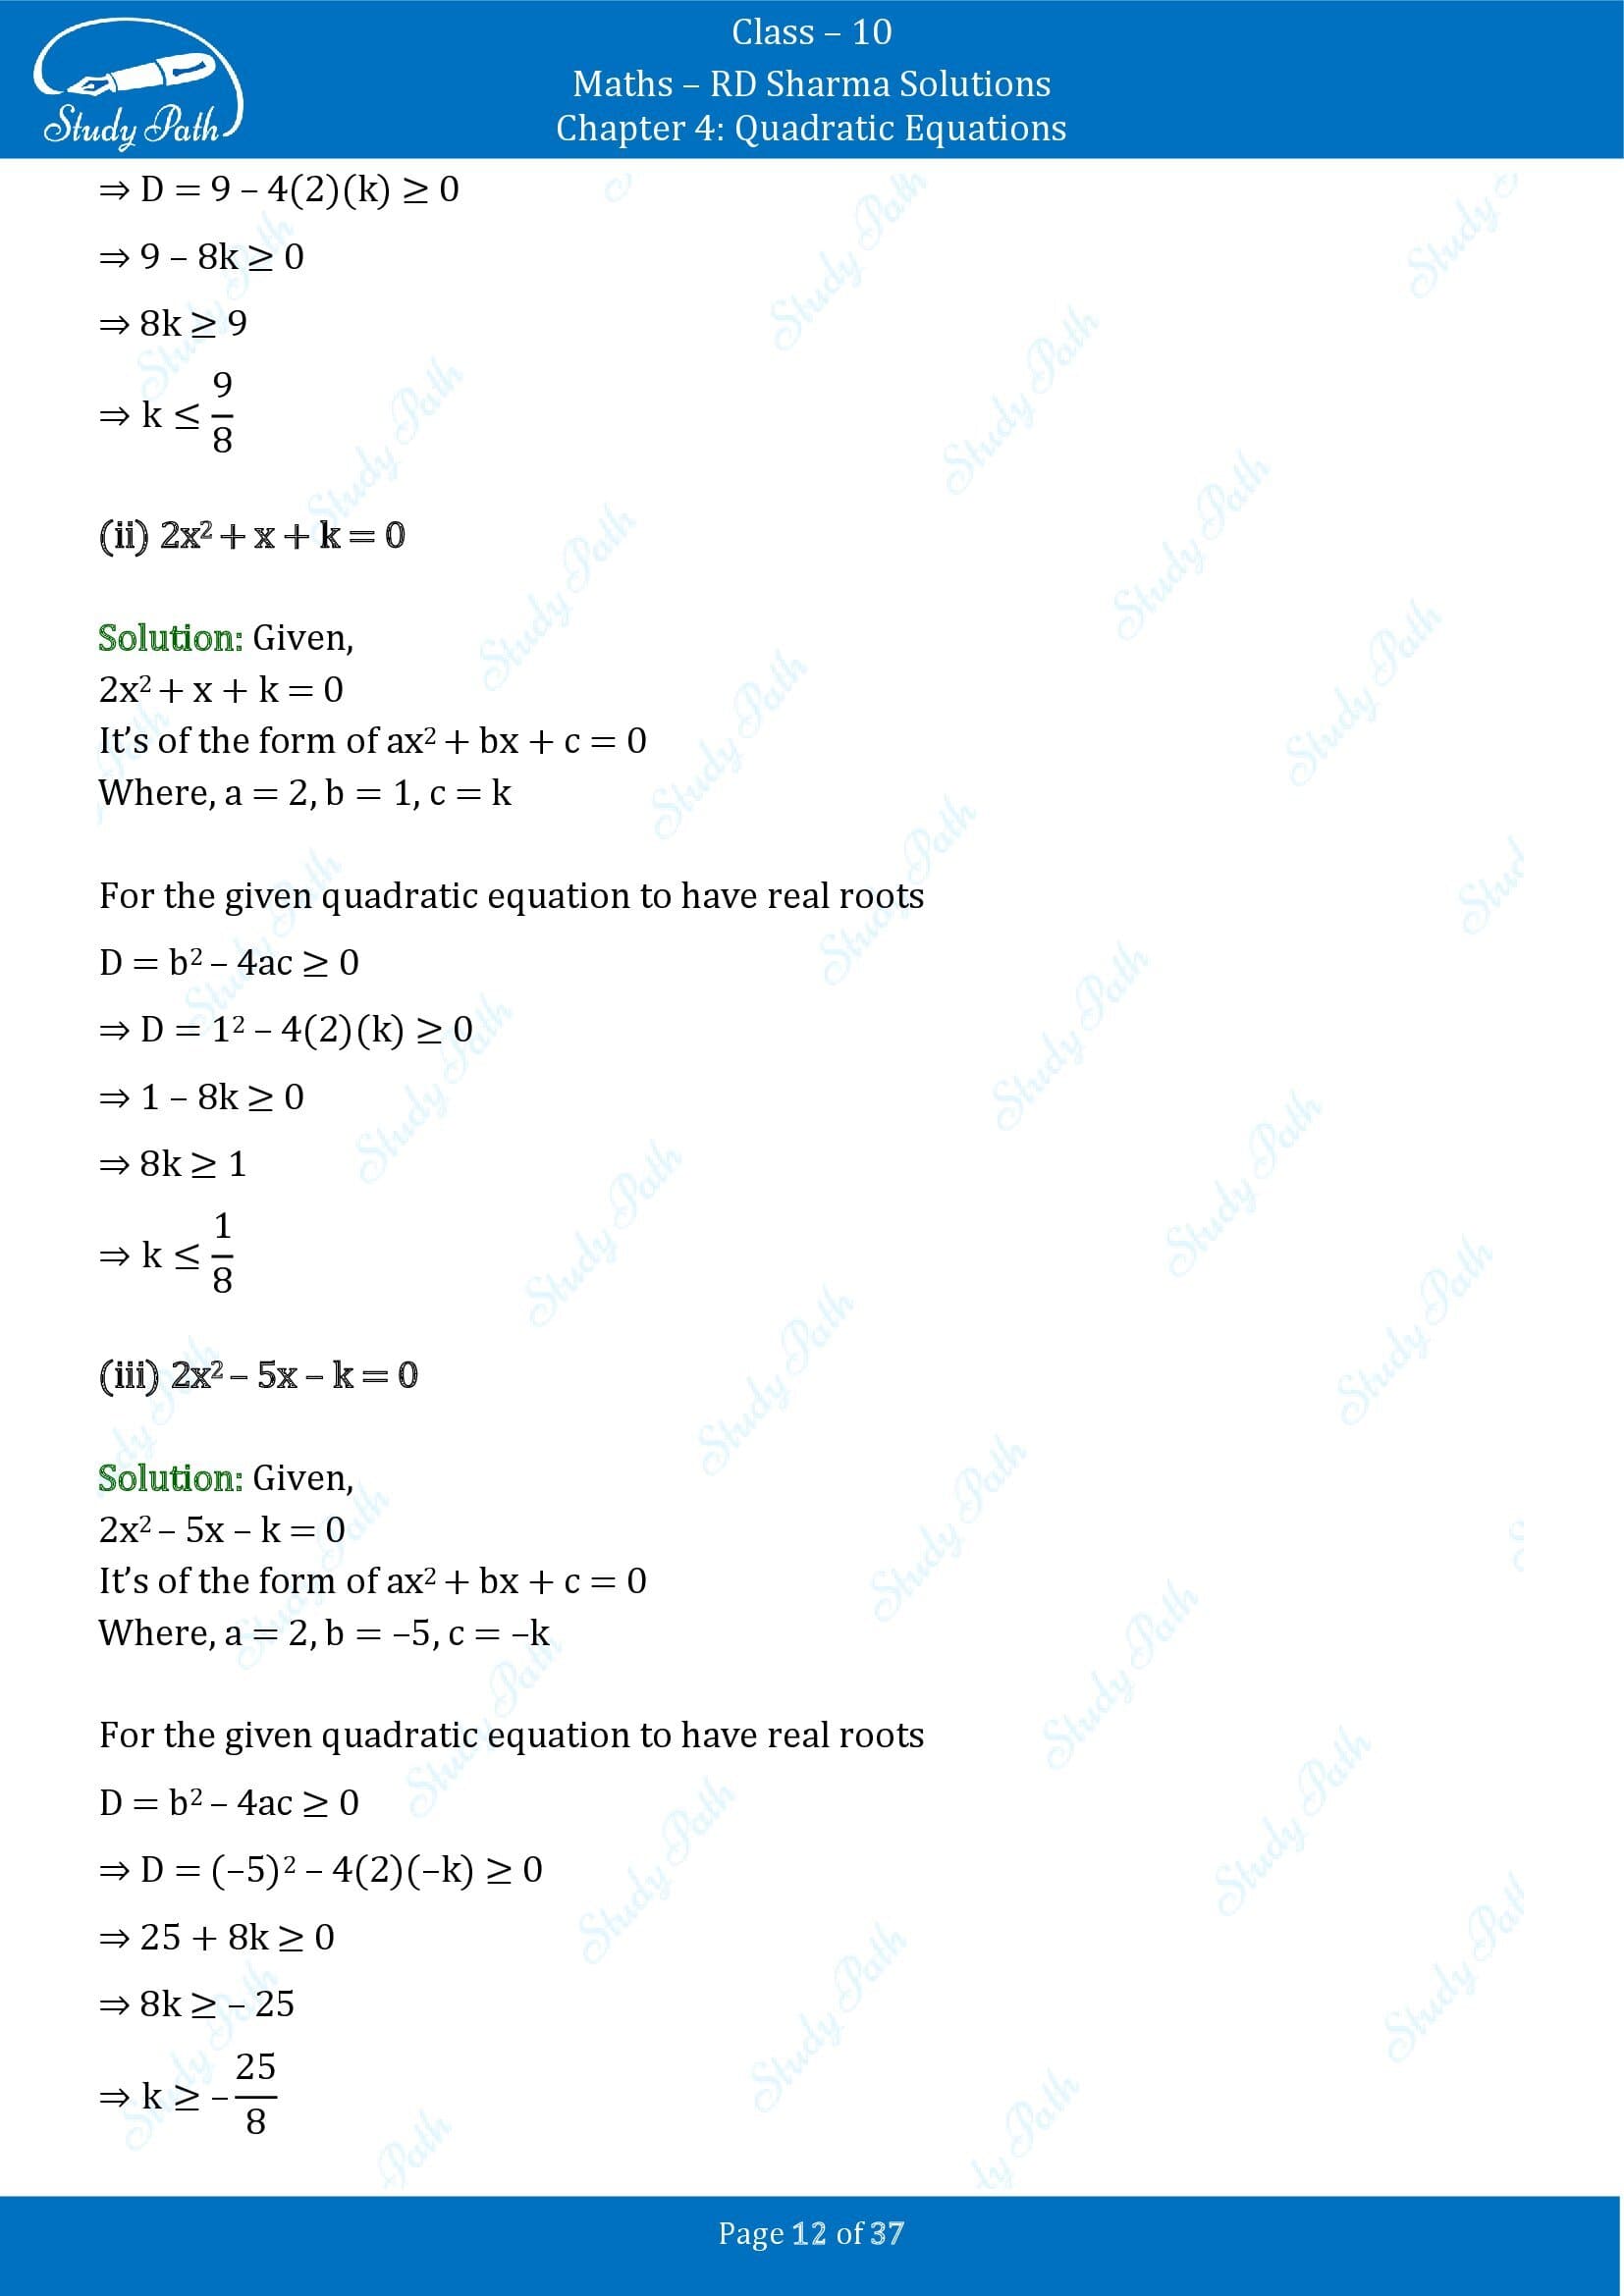 RD Sharma Solutions Class 10 Chapter 4 Quadratic Equations Exercise 4.6 00012